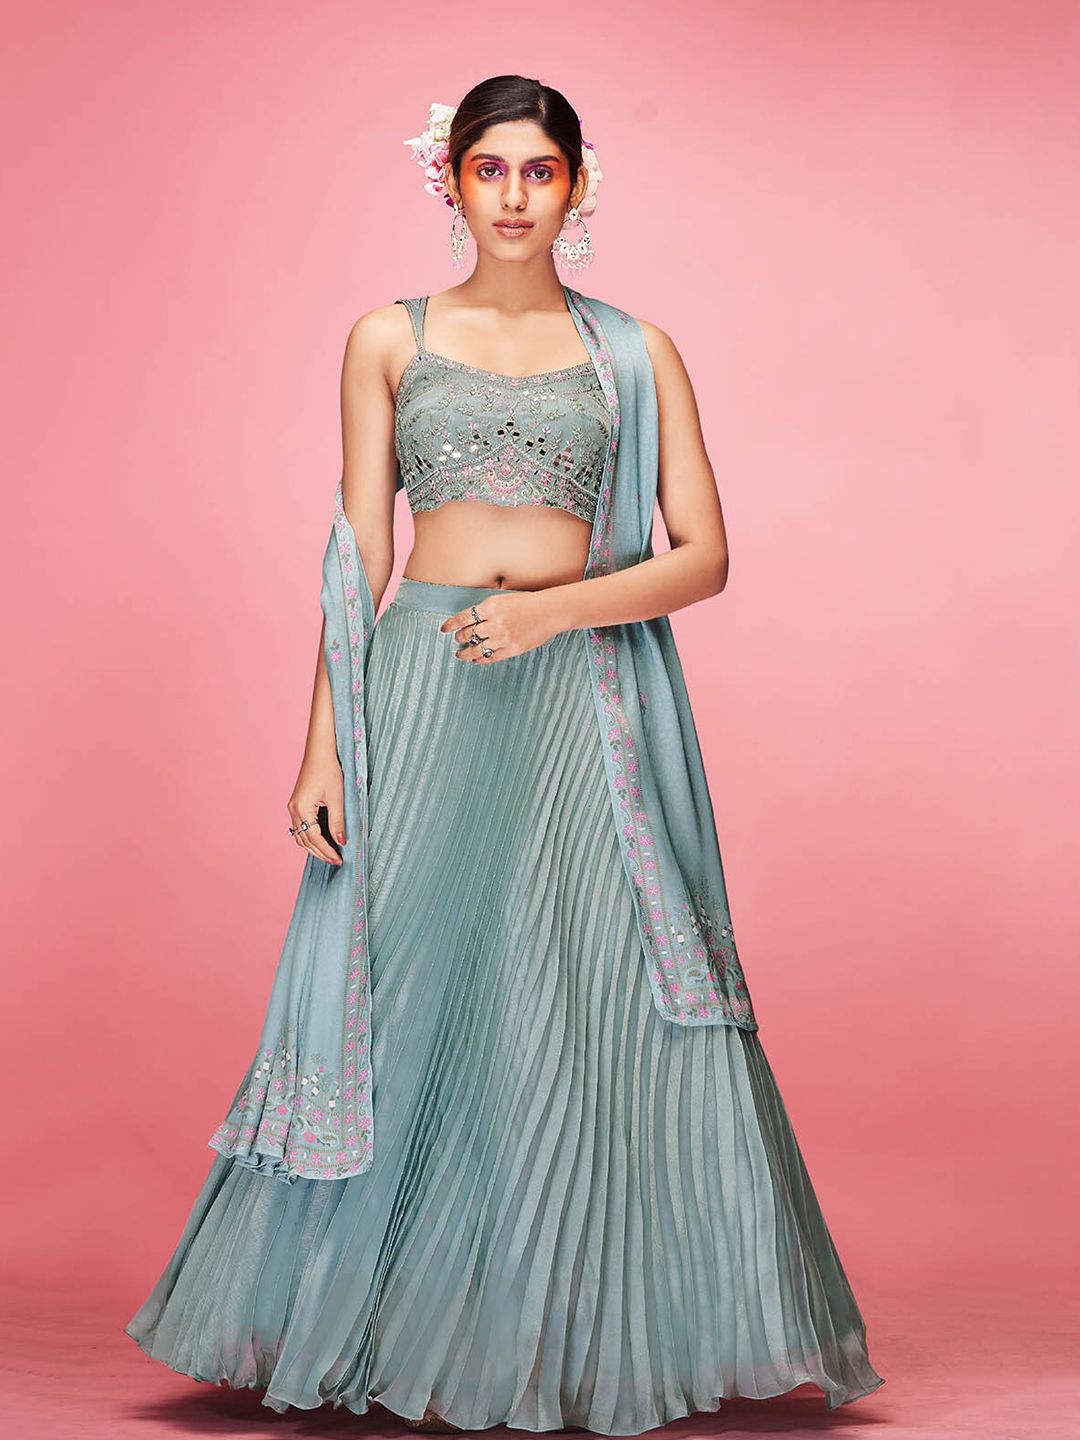 ODETTE Blue & Pink Mirror Work Embroidered Semi-Stitched Lehenga Choli Set Price in India